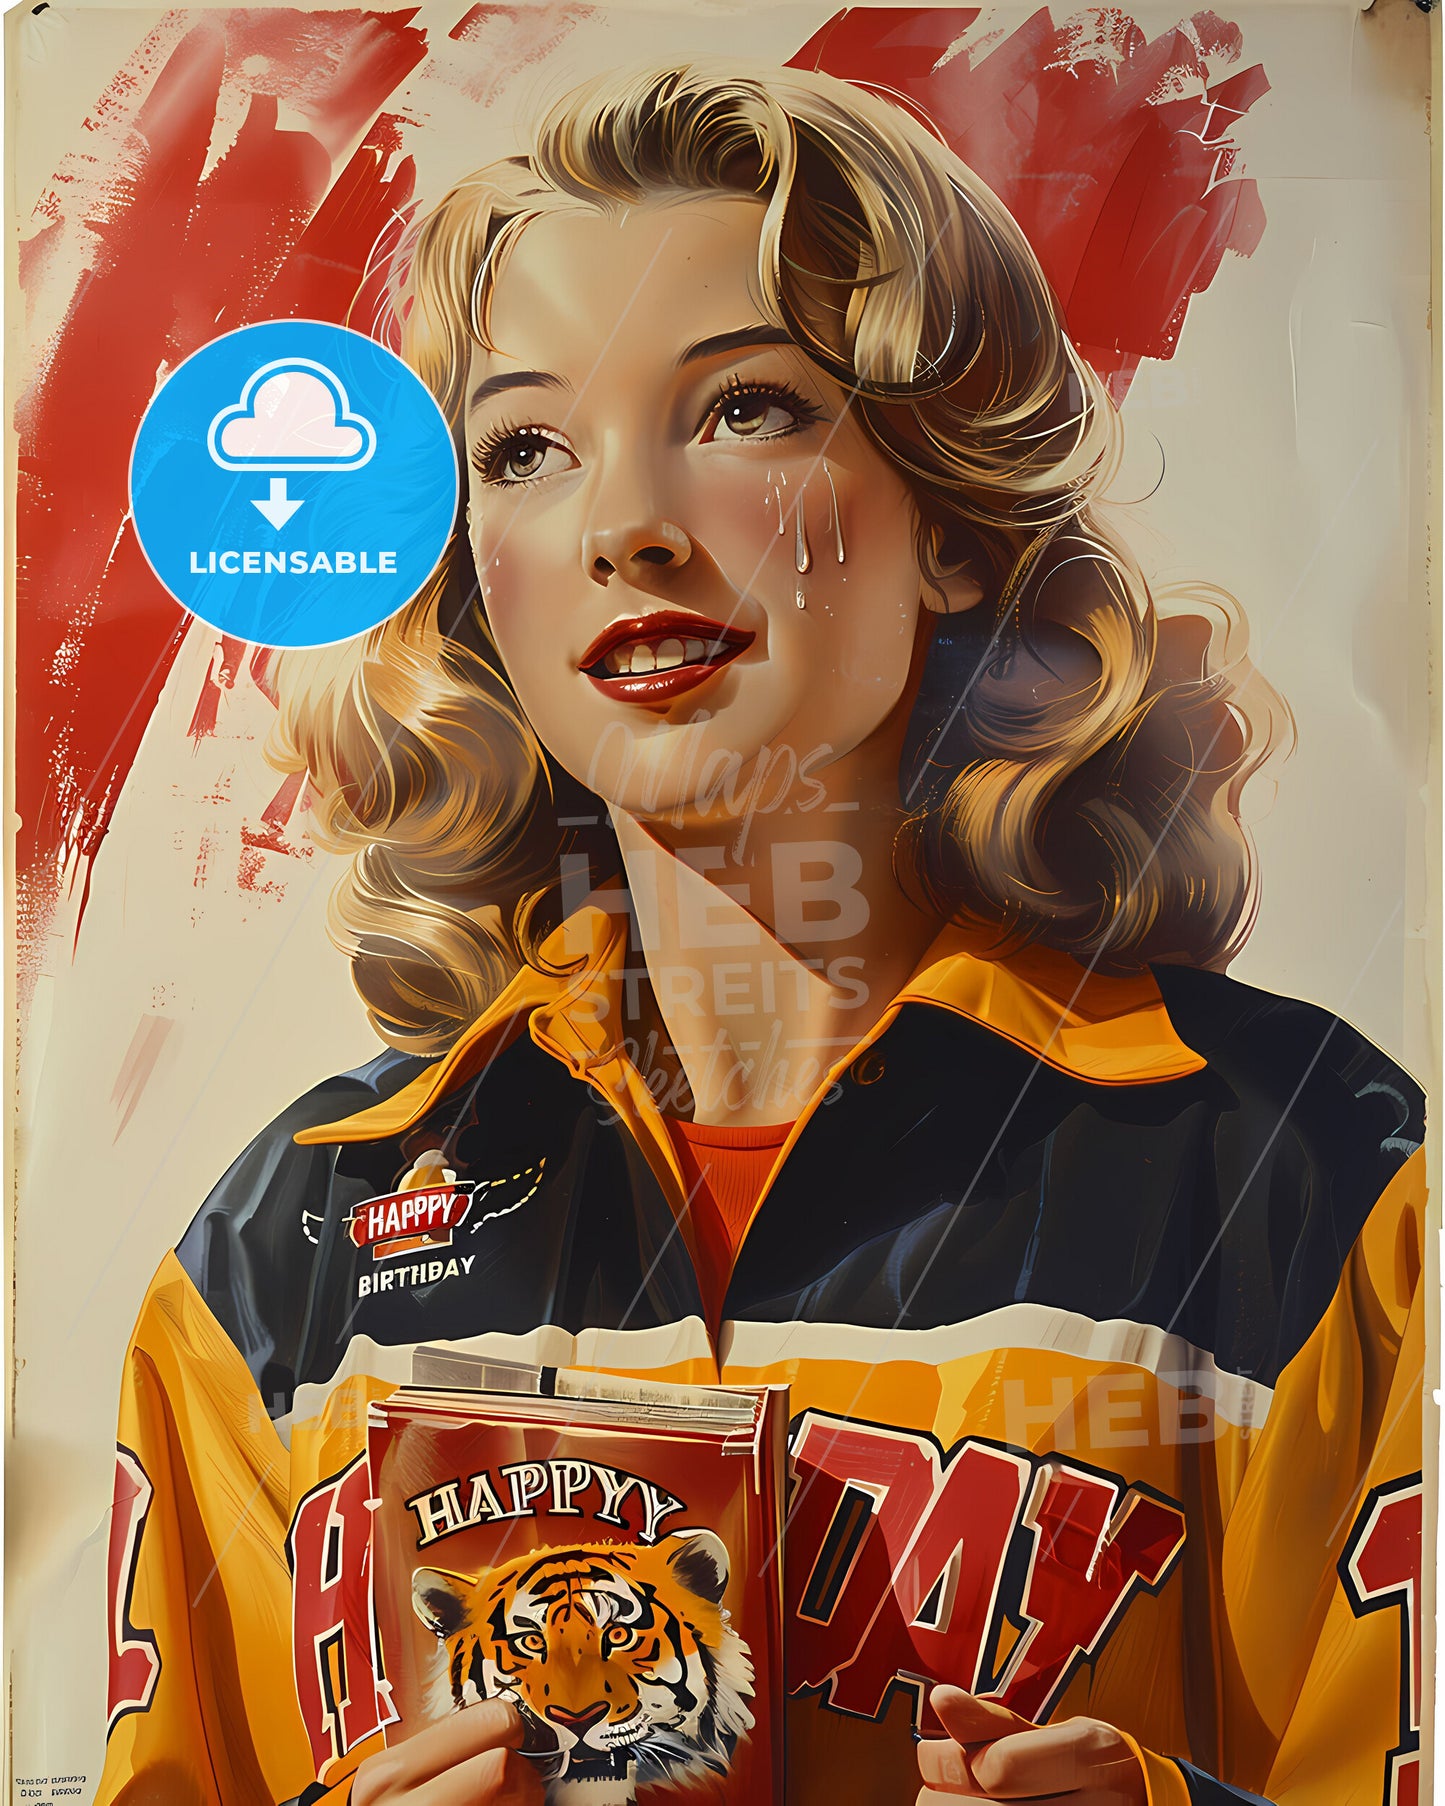 Utopian Vintage 1980s Horror Movie Princess Advertising - Happy Birthday Packaging with Blonde Princess in Ice Hockey Uniform and Tiger Logo. 40 Years Specialism Illustration.